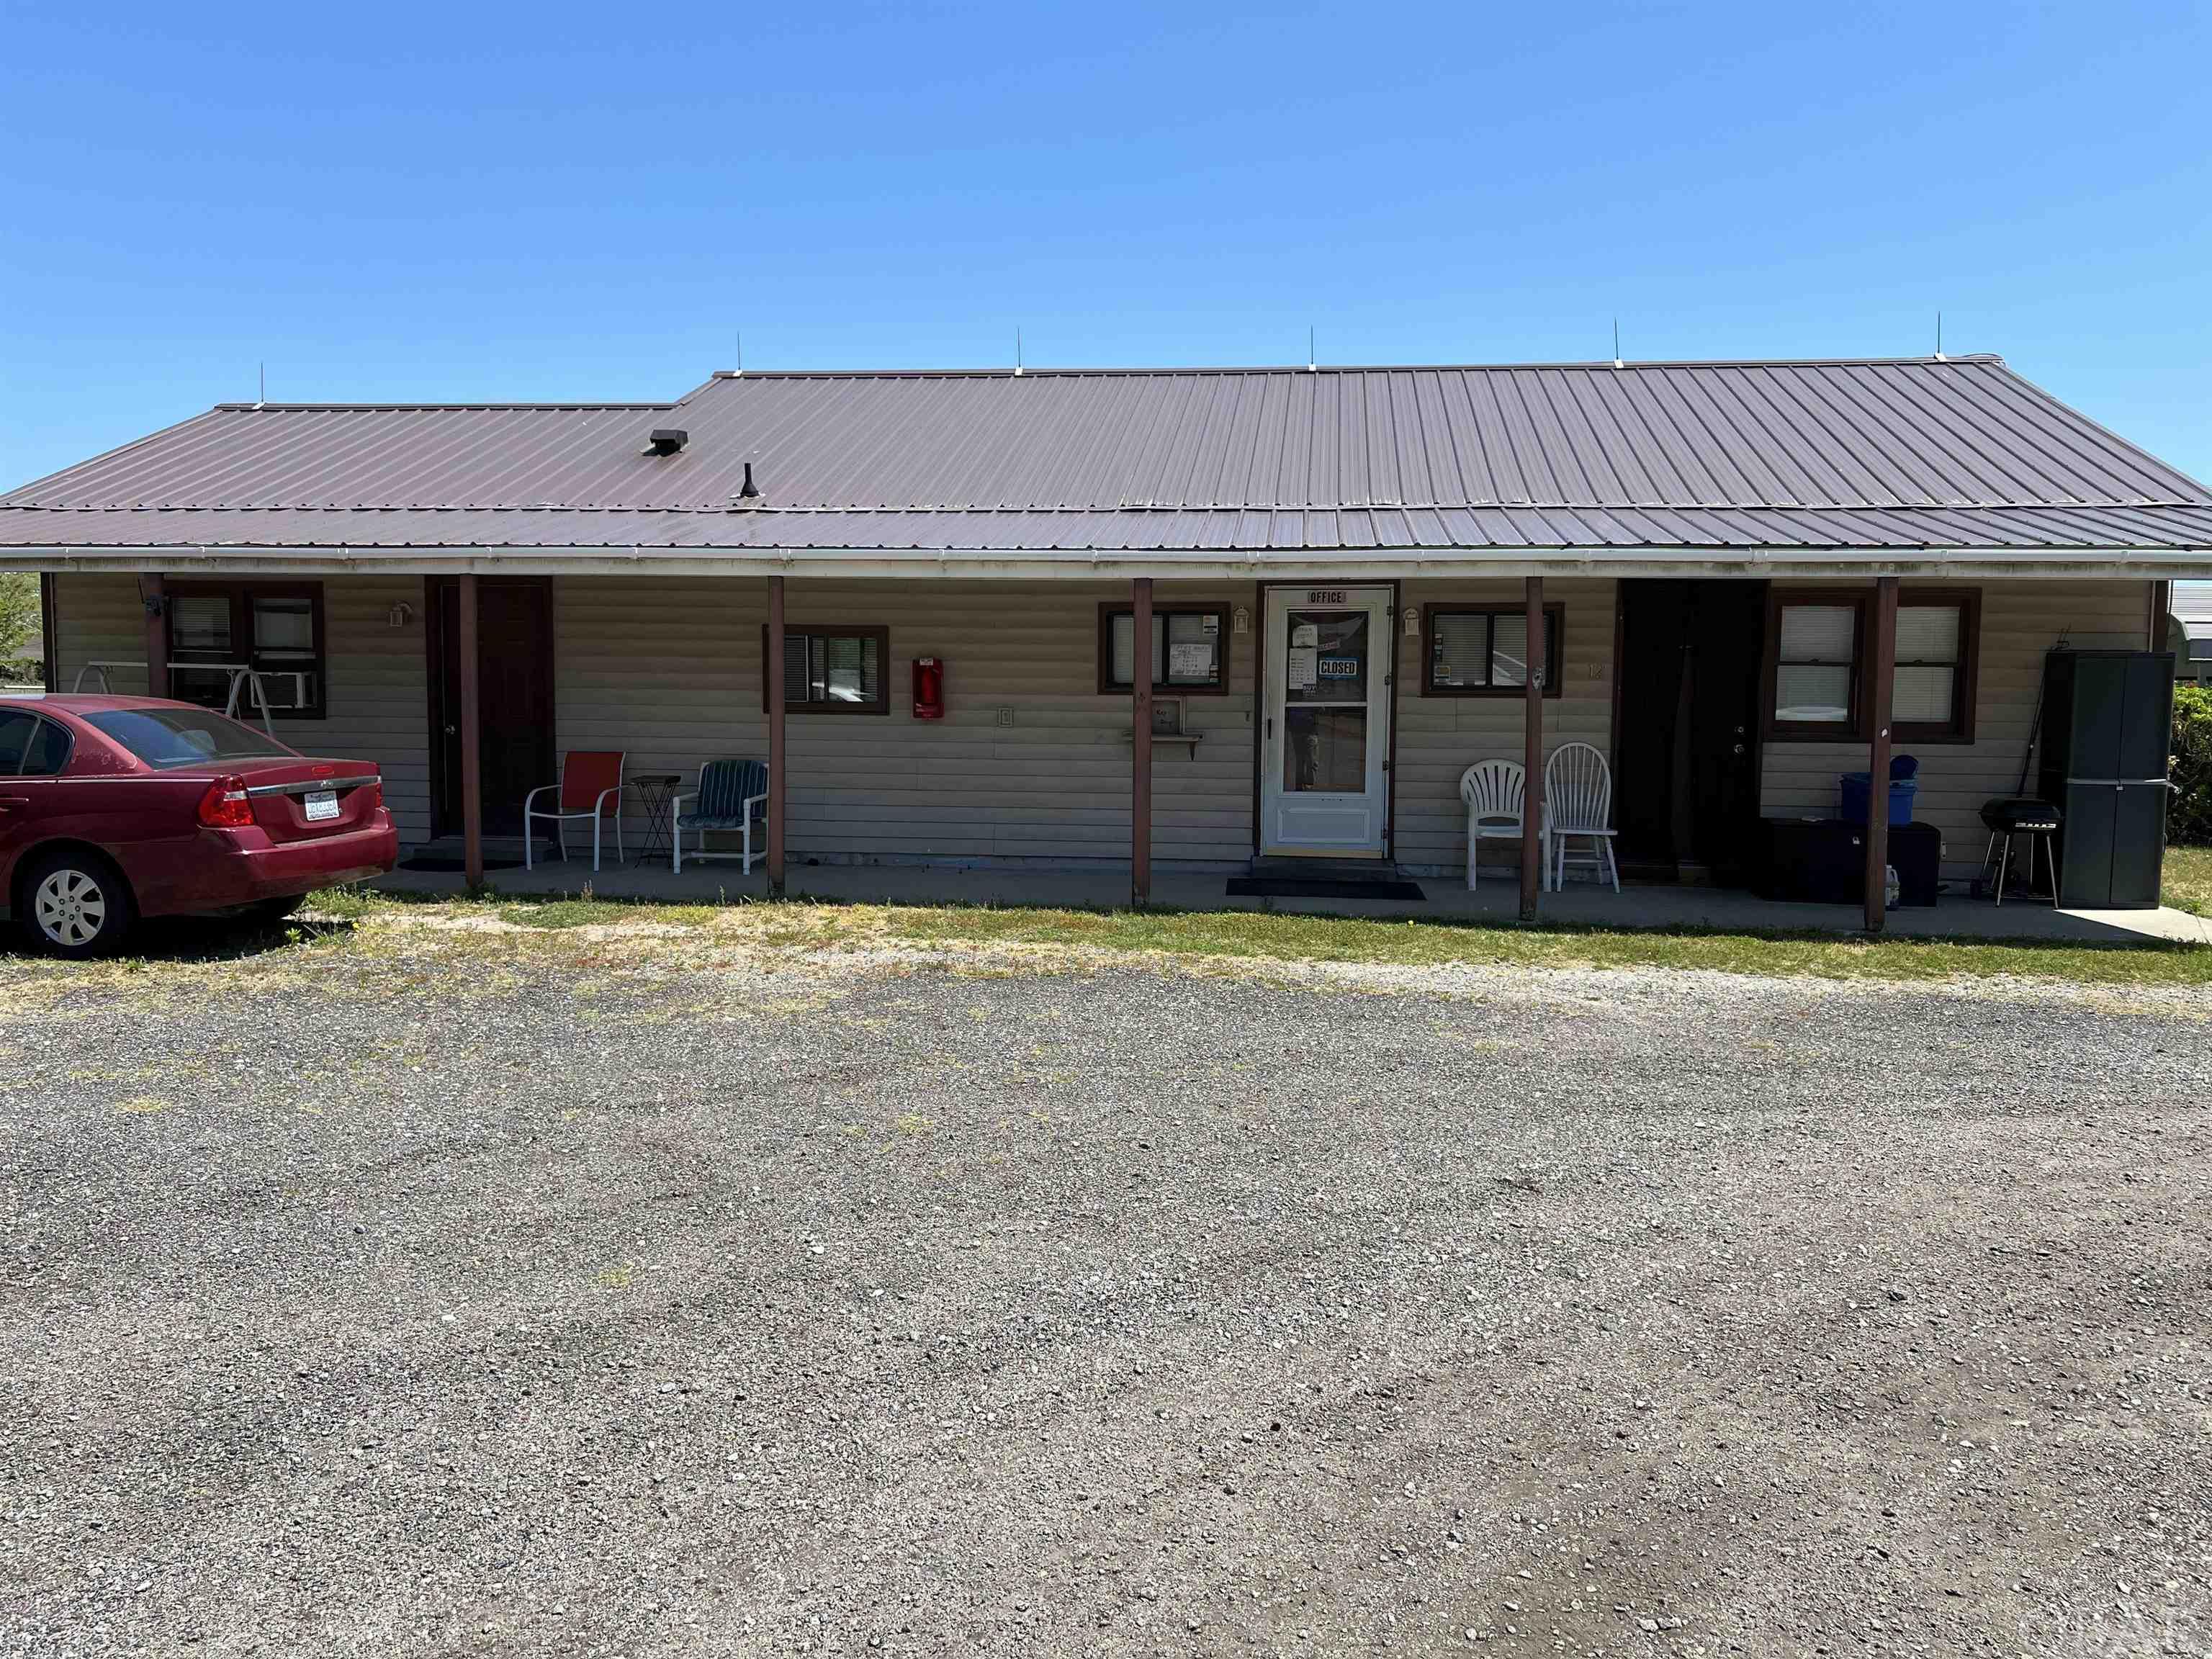 12 Unit motel extended stay. 6 Room recently remodeled and working on 3 more. Price will increase with the completion of each of the 3 rooms. Roofs (metal) are 5 years old on 3 of the building and the 4th is new as of March. Owners are NC Real Estate Brokers.